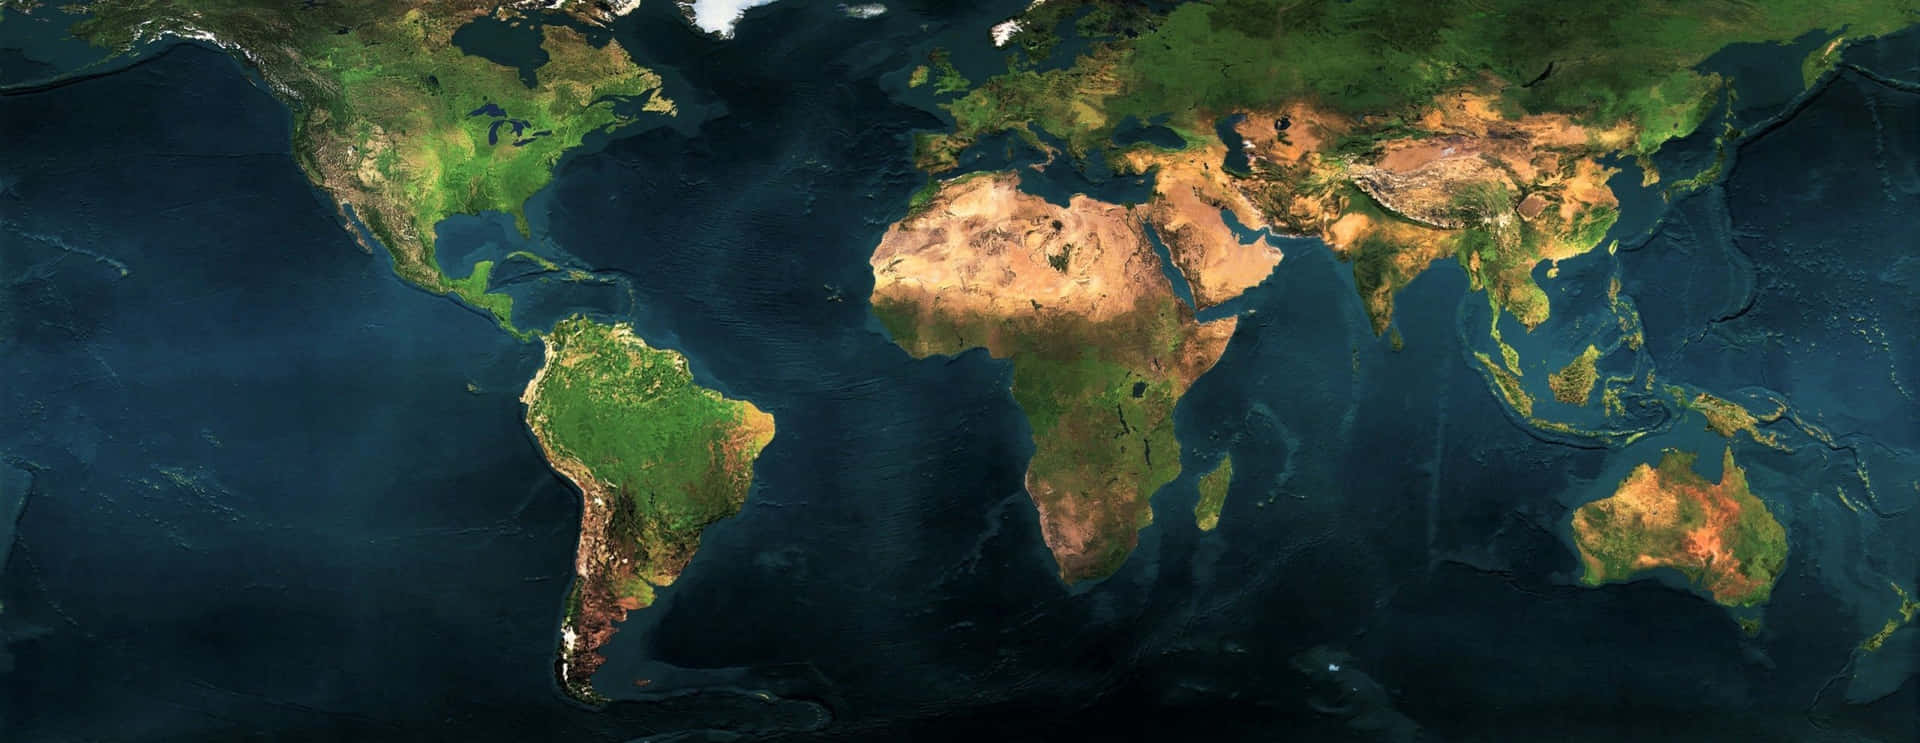 A Satellite Image Of The World